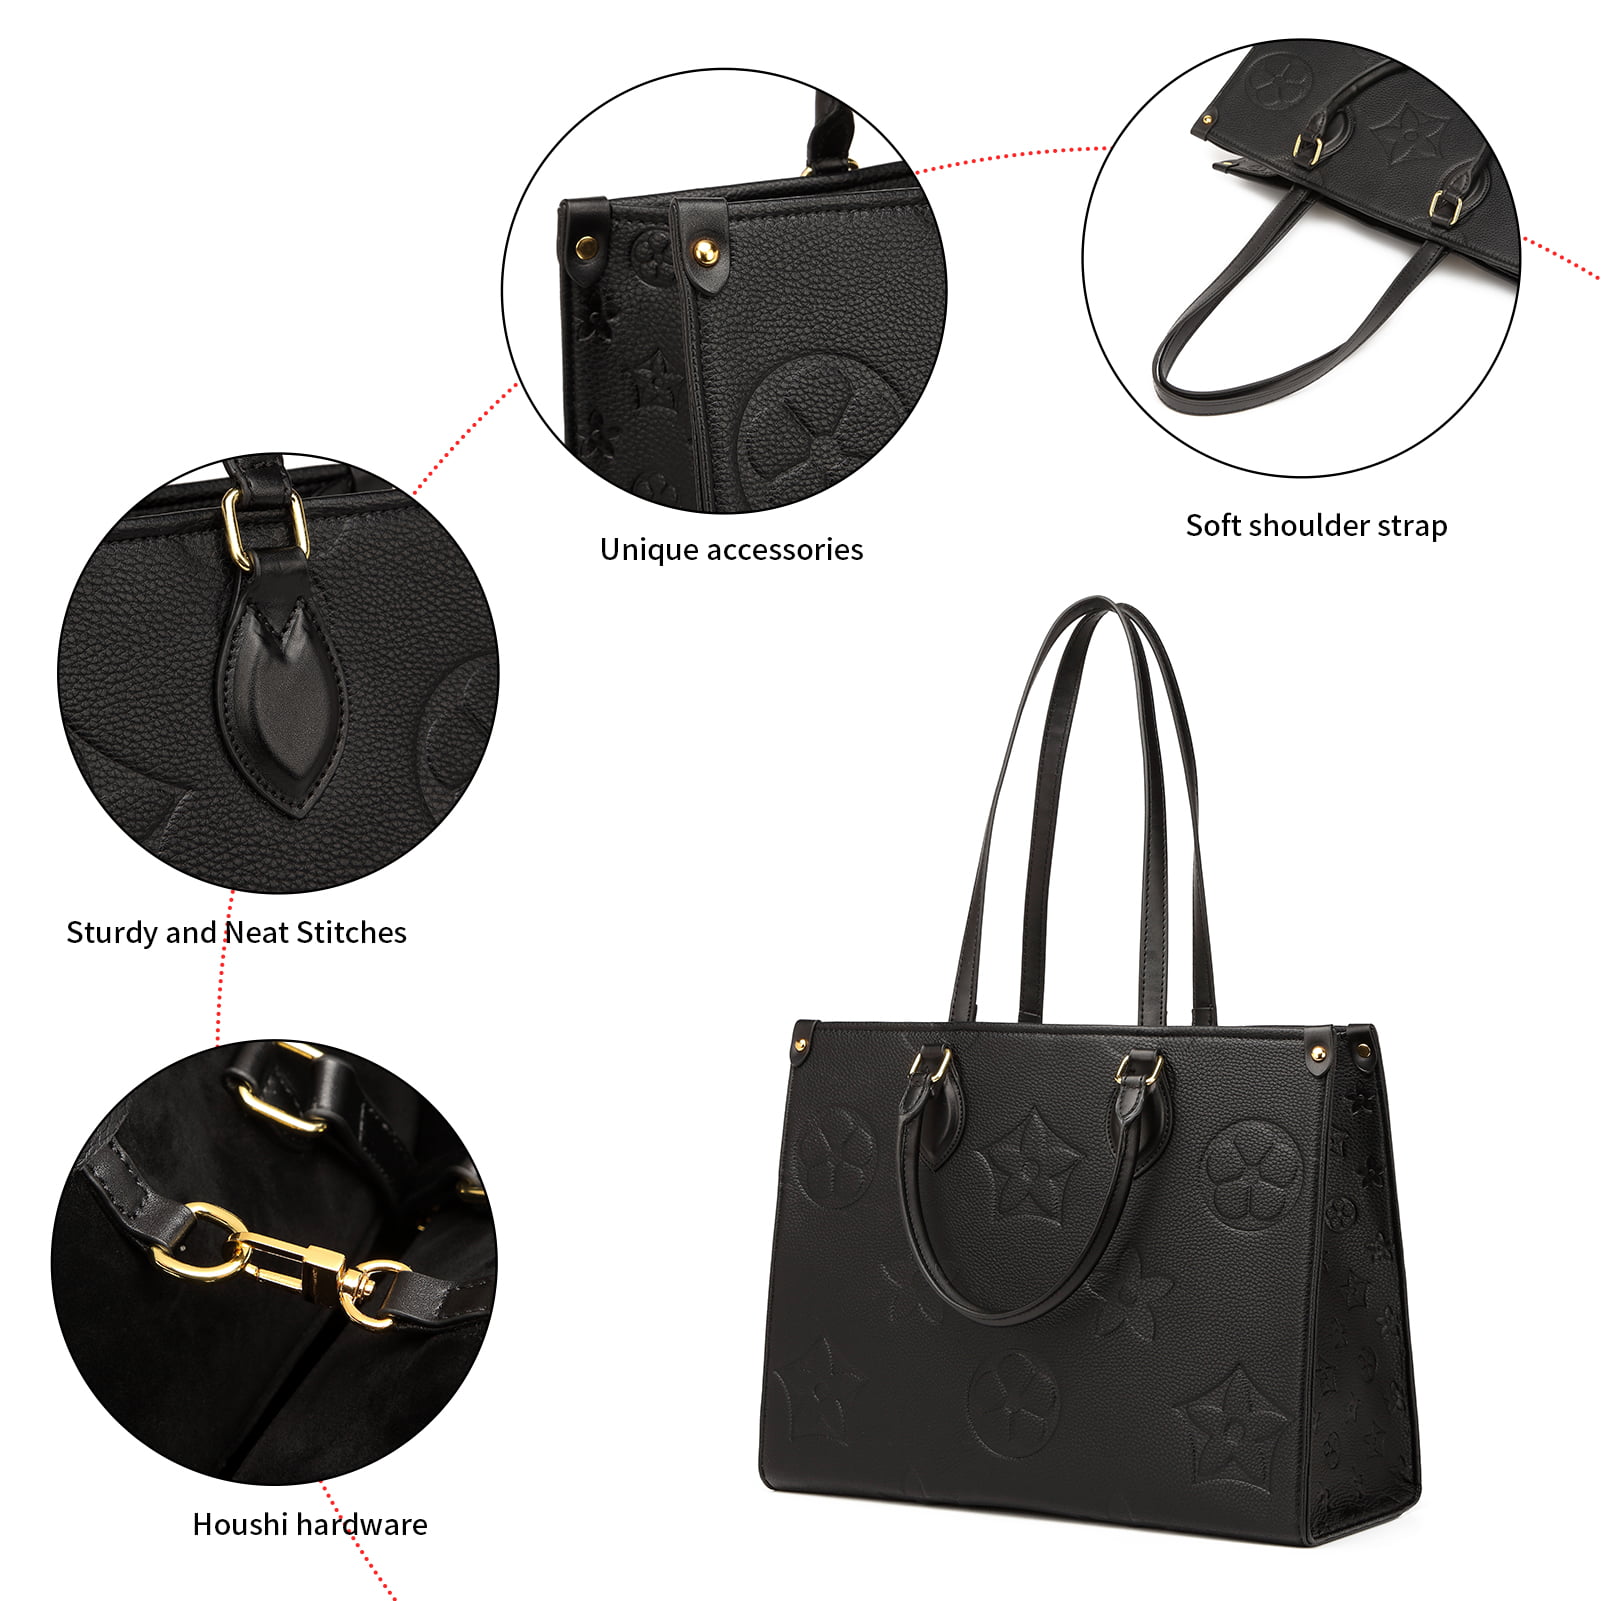 Mila Kate Top Handle Satchel Bags for Women | Women's Shoulder Purses and Handbags | Black Messenger Tote Bag for Ladies | Large 16.1 X 7.5 X 13.4 Inches - image 3 of 6